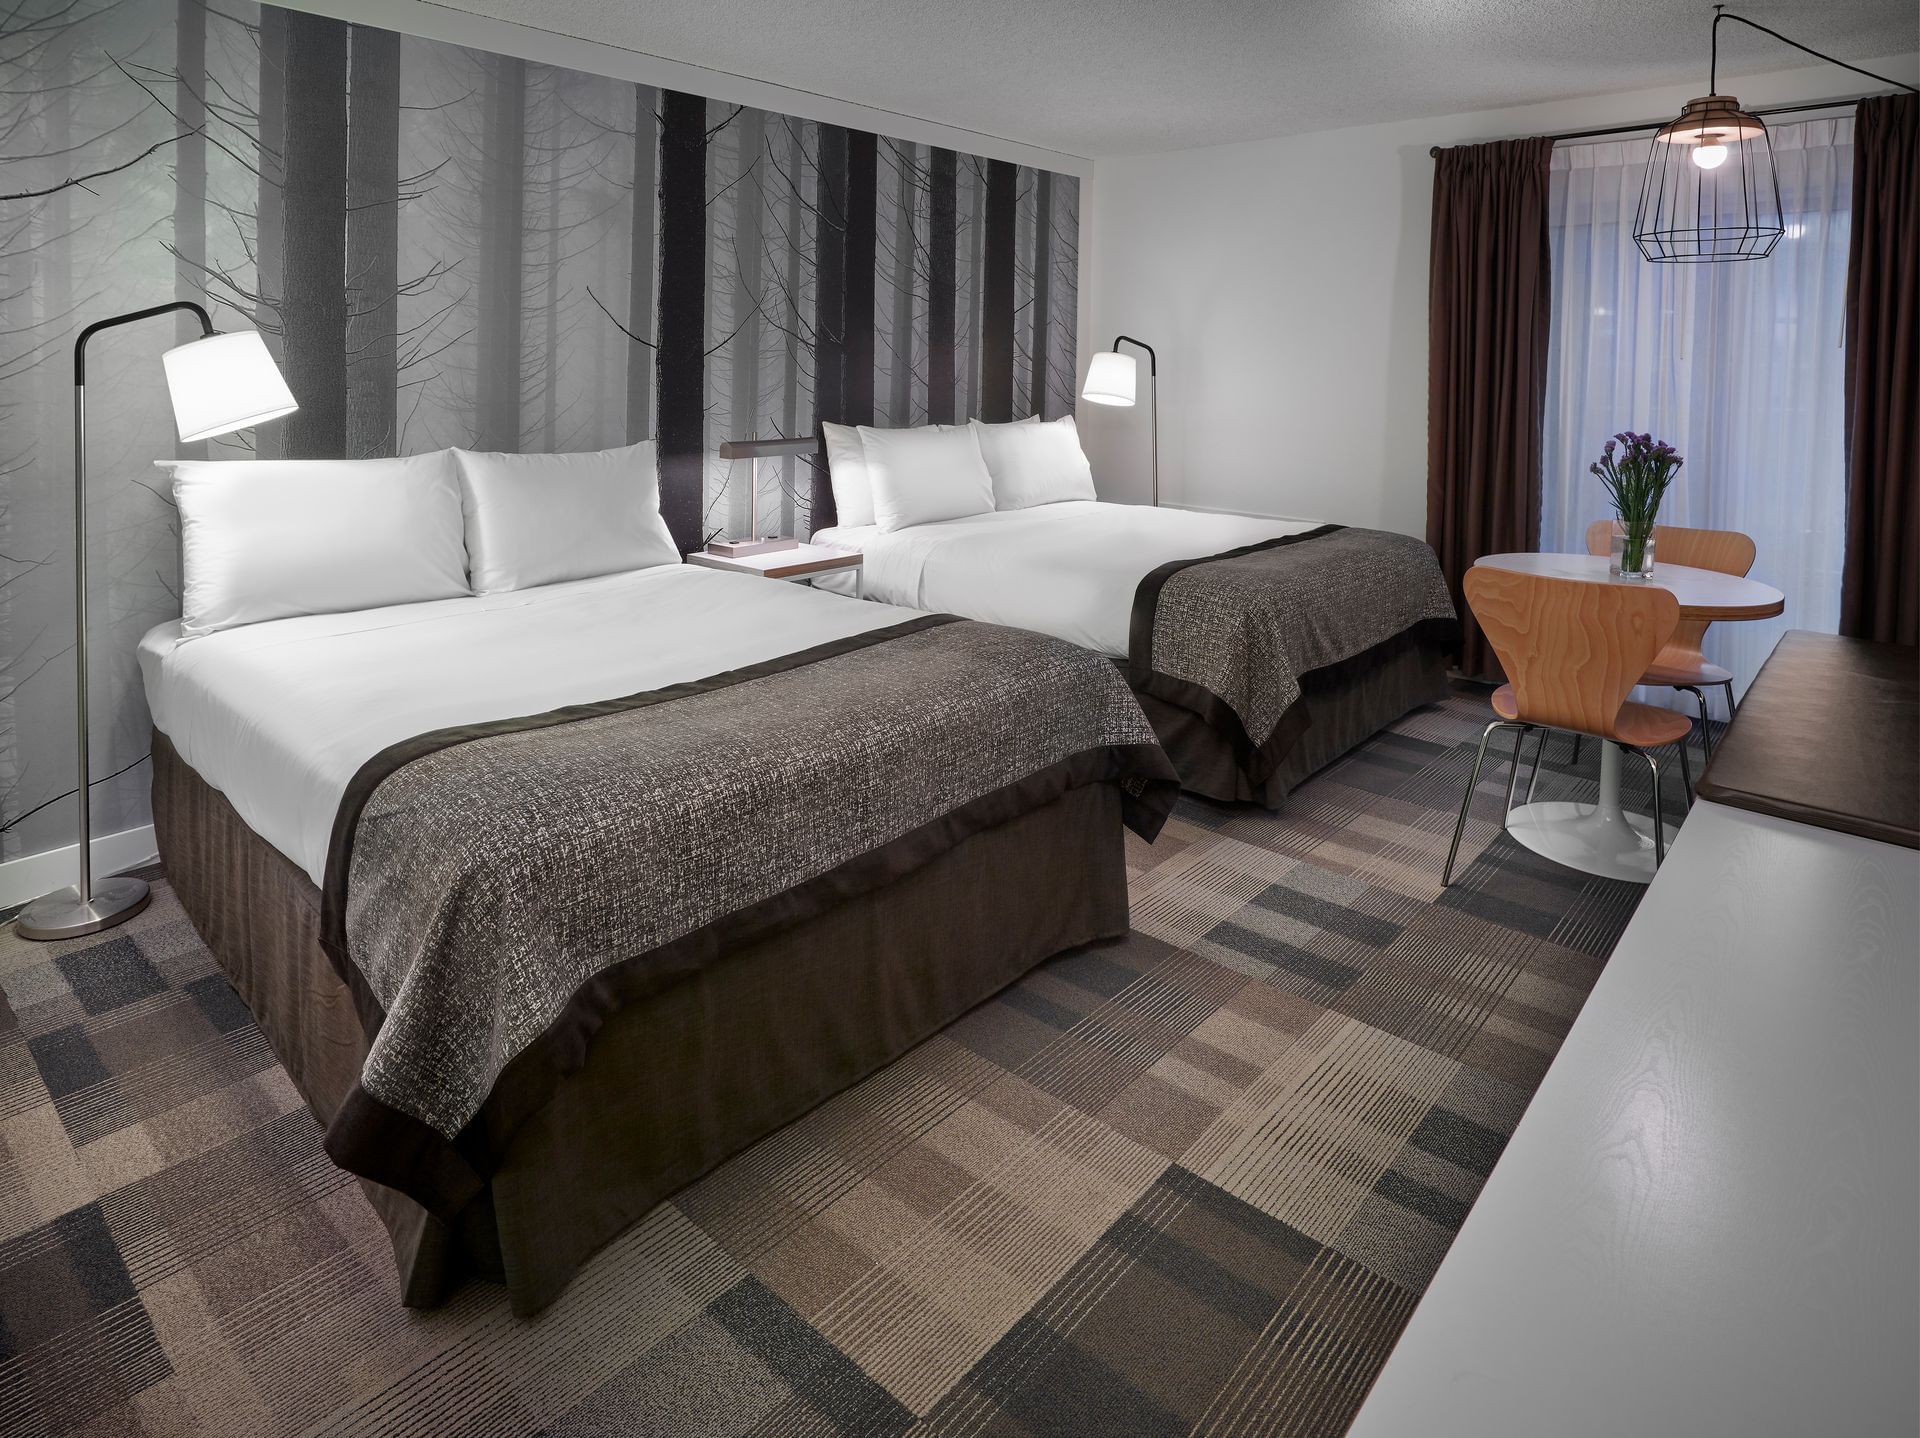 Two beds in modern hotel room